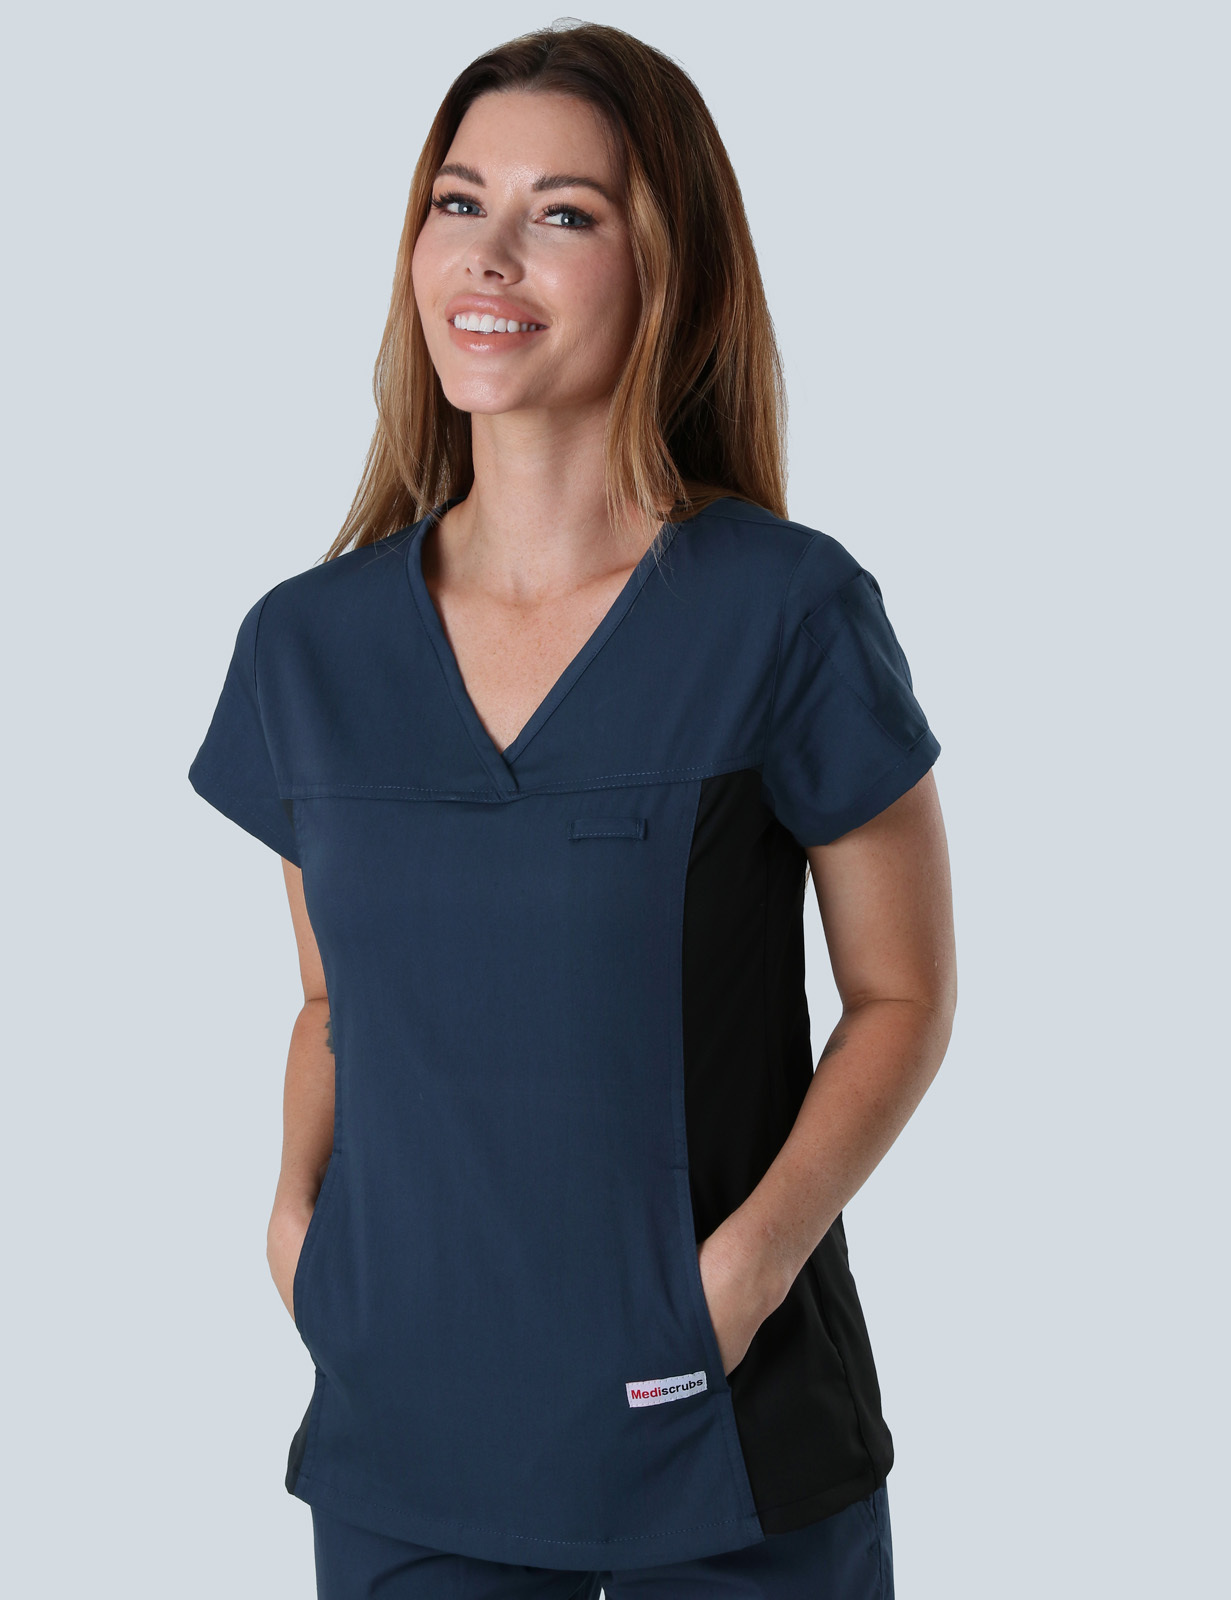 Ashmore Retreat Endorsed Enrolled Nurse Top Only Bundle (Women's Fit Spandex in Navy incl Logo) 